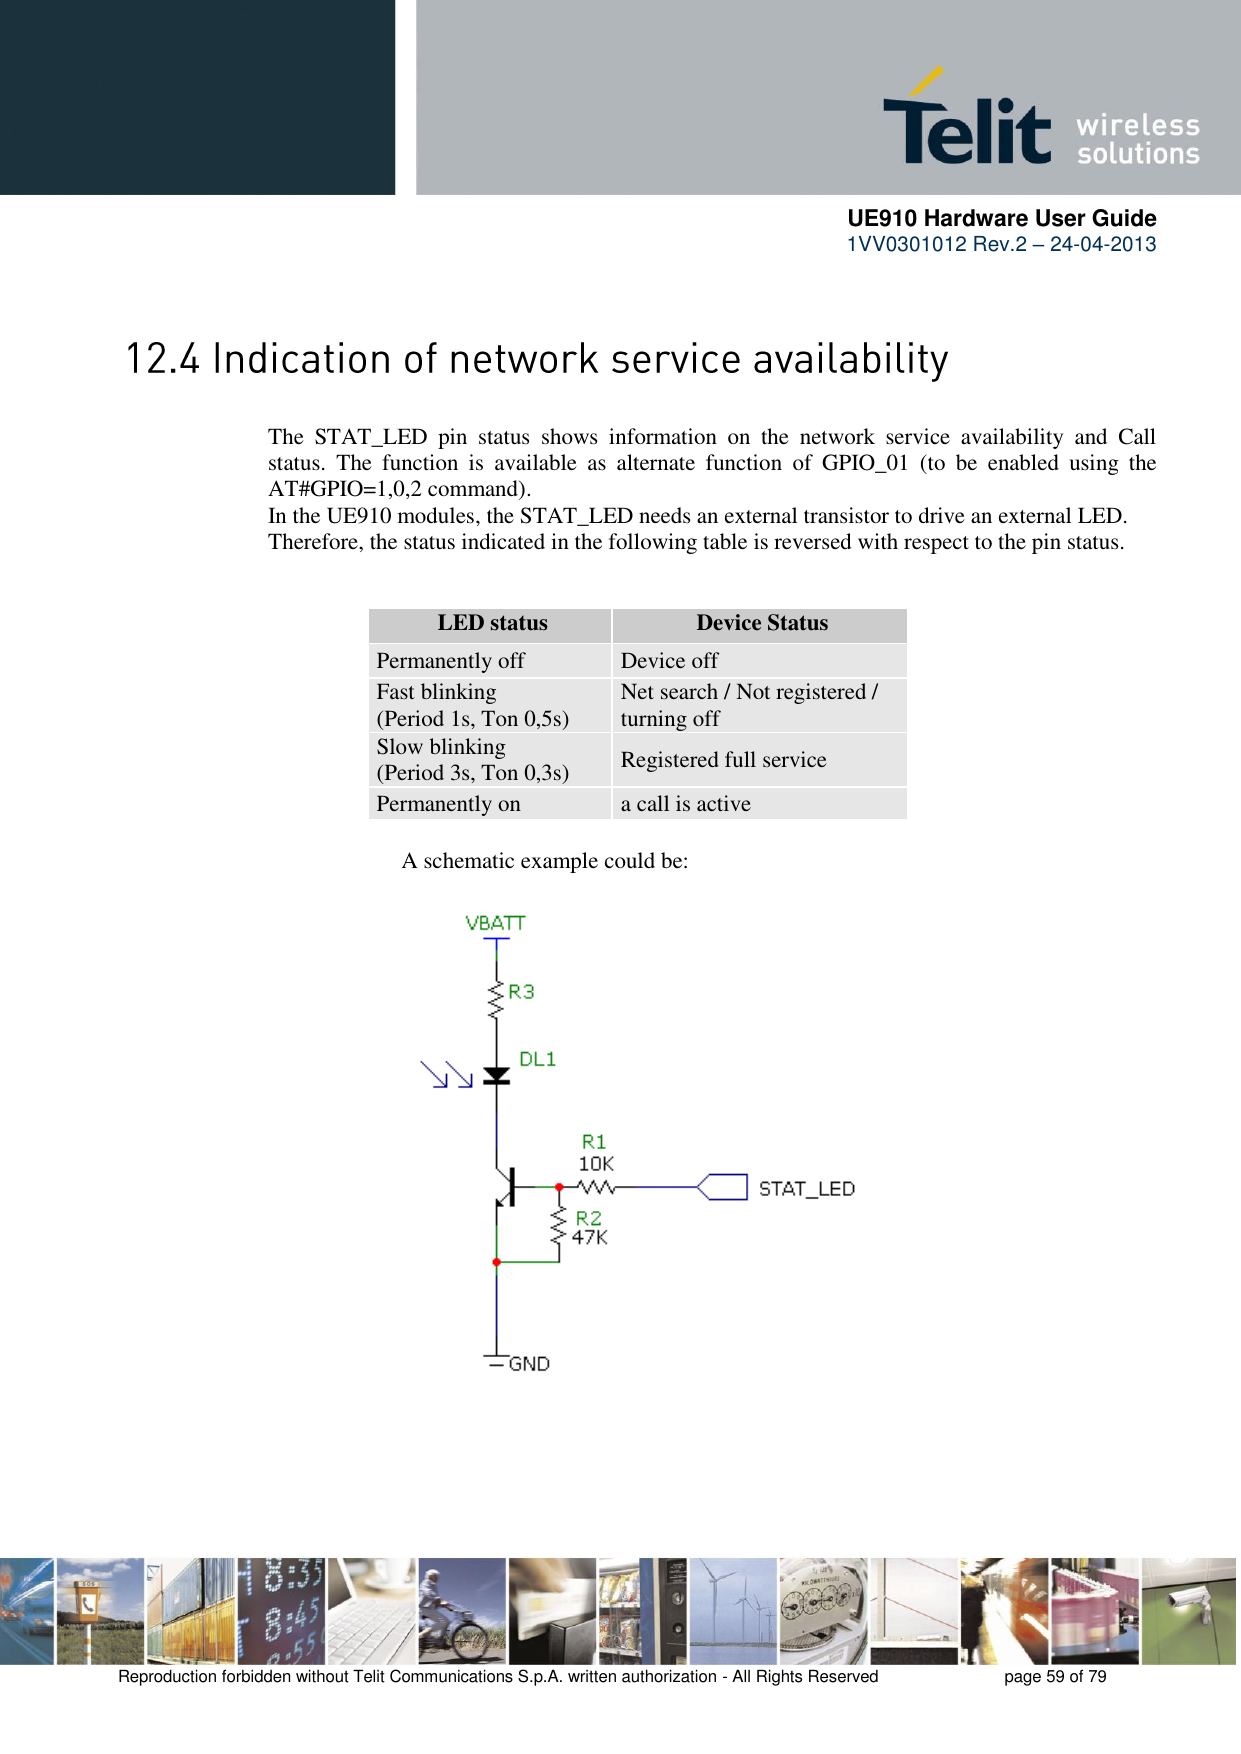      UE910 Hardware User Guide  1VV0301012 Rev.2 – 24-04-2013    Reproduction forbidden without Telit Communications S.p.A. written authorization - All Rights Reserved    page 59 of 79   The  STAT_LED  pin  status  shows  information  on  the  network  service  availability  and  Call status.  The  function  is  available  as  alternate  function  of  GPIO_01  (to  be  enabled  using  the AT#GPIO=1,0,2 command). In the UE910 modules, the STAT_LED needs an external transistor to drive an external LED. Therefore, the status indicated in the following table is reversed with respect to the pin status.            LED status Device Status Permanently off Device off Fast blinking (Period 1s, Ton 0,5s) Net search / Not registered / turning off Slow blinking (Period 3s, Ton 0,3s) Registered full service Permanently on a call is active           A schematic example could be: 